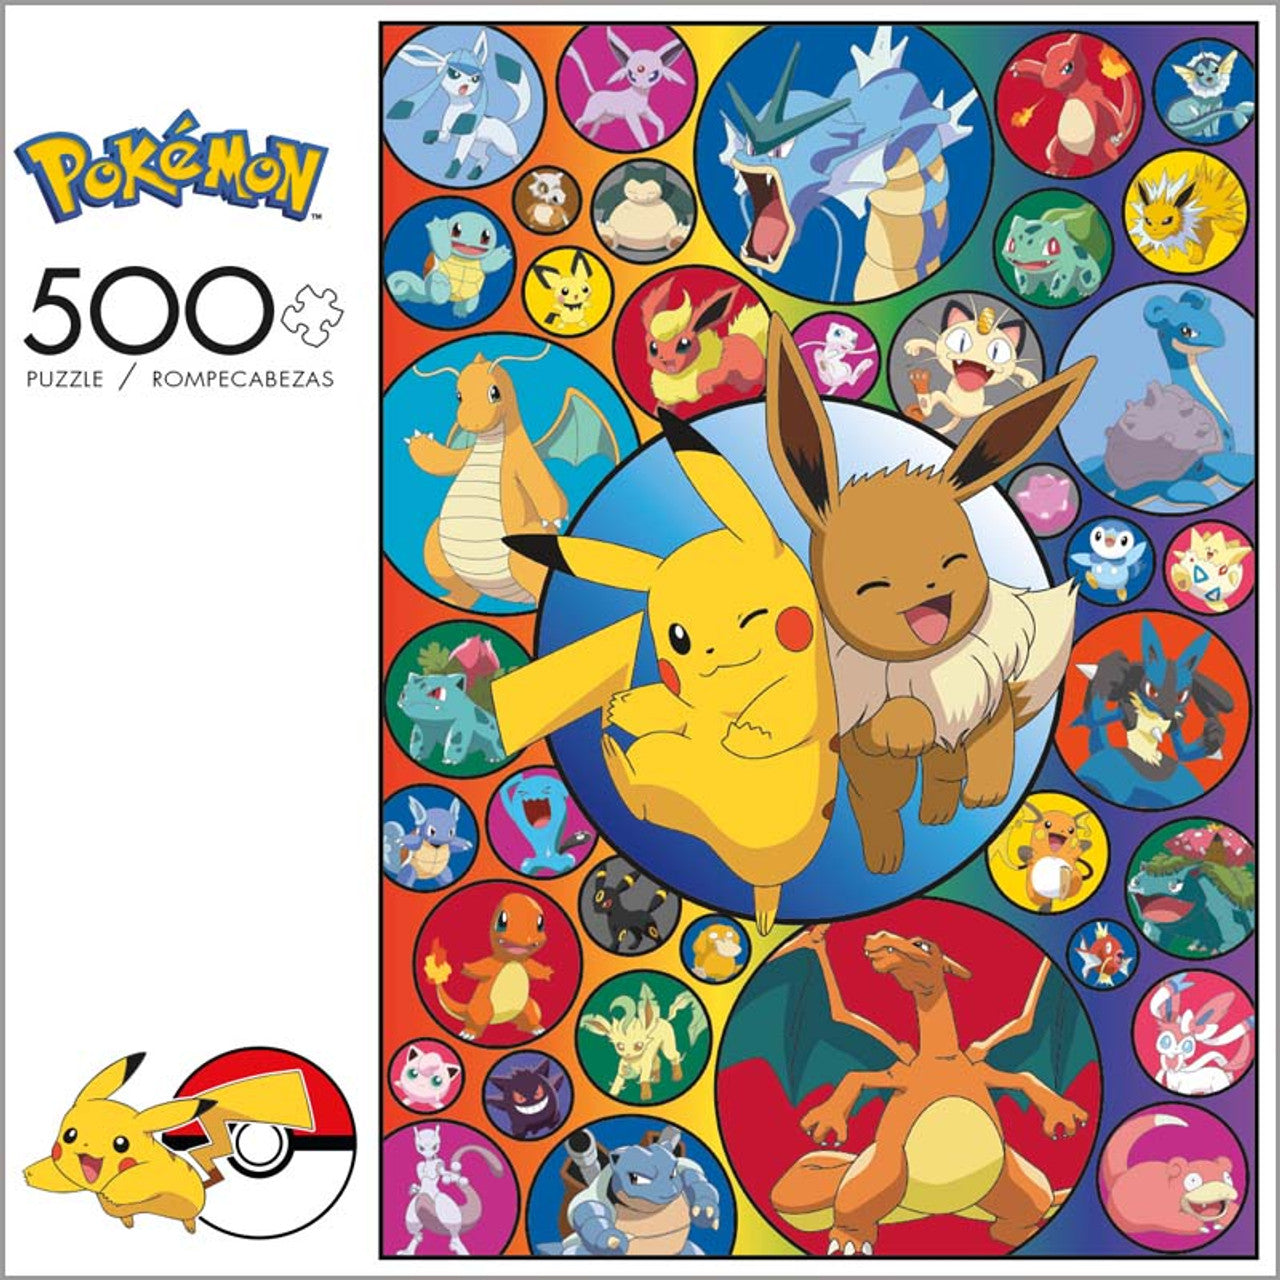 Pokemon Multipack, Pieces Vary, Buffalo Games